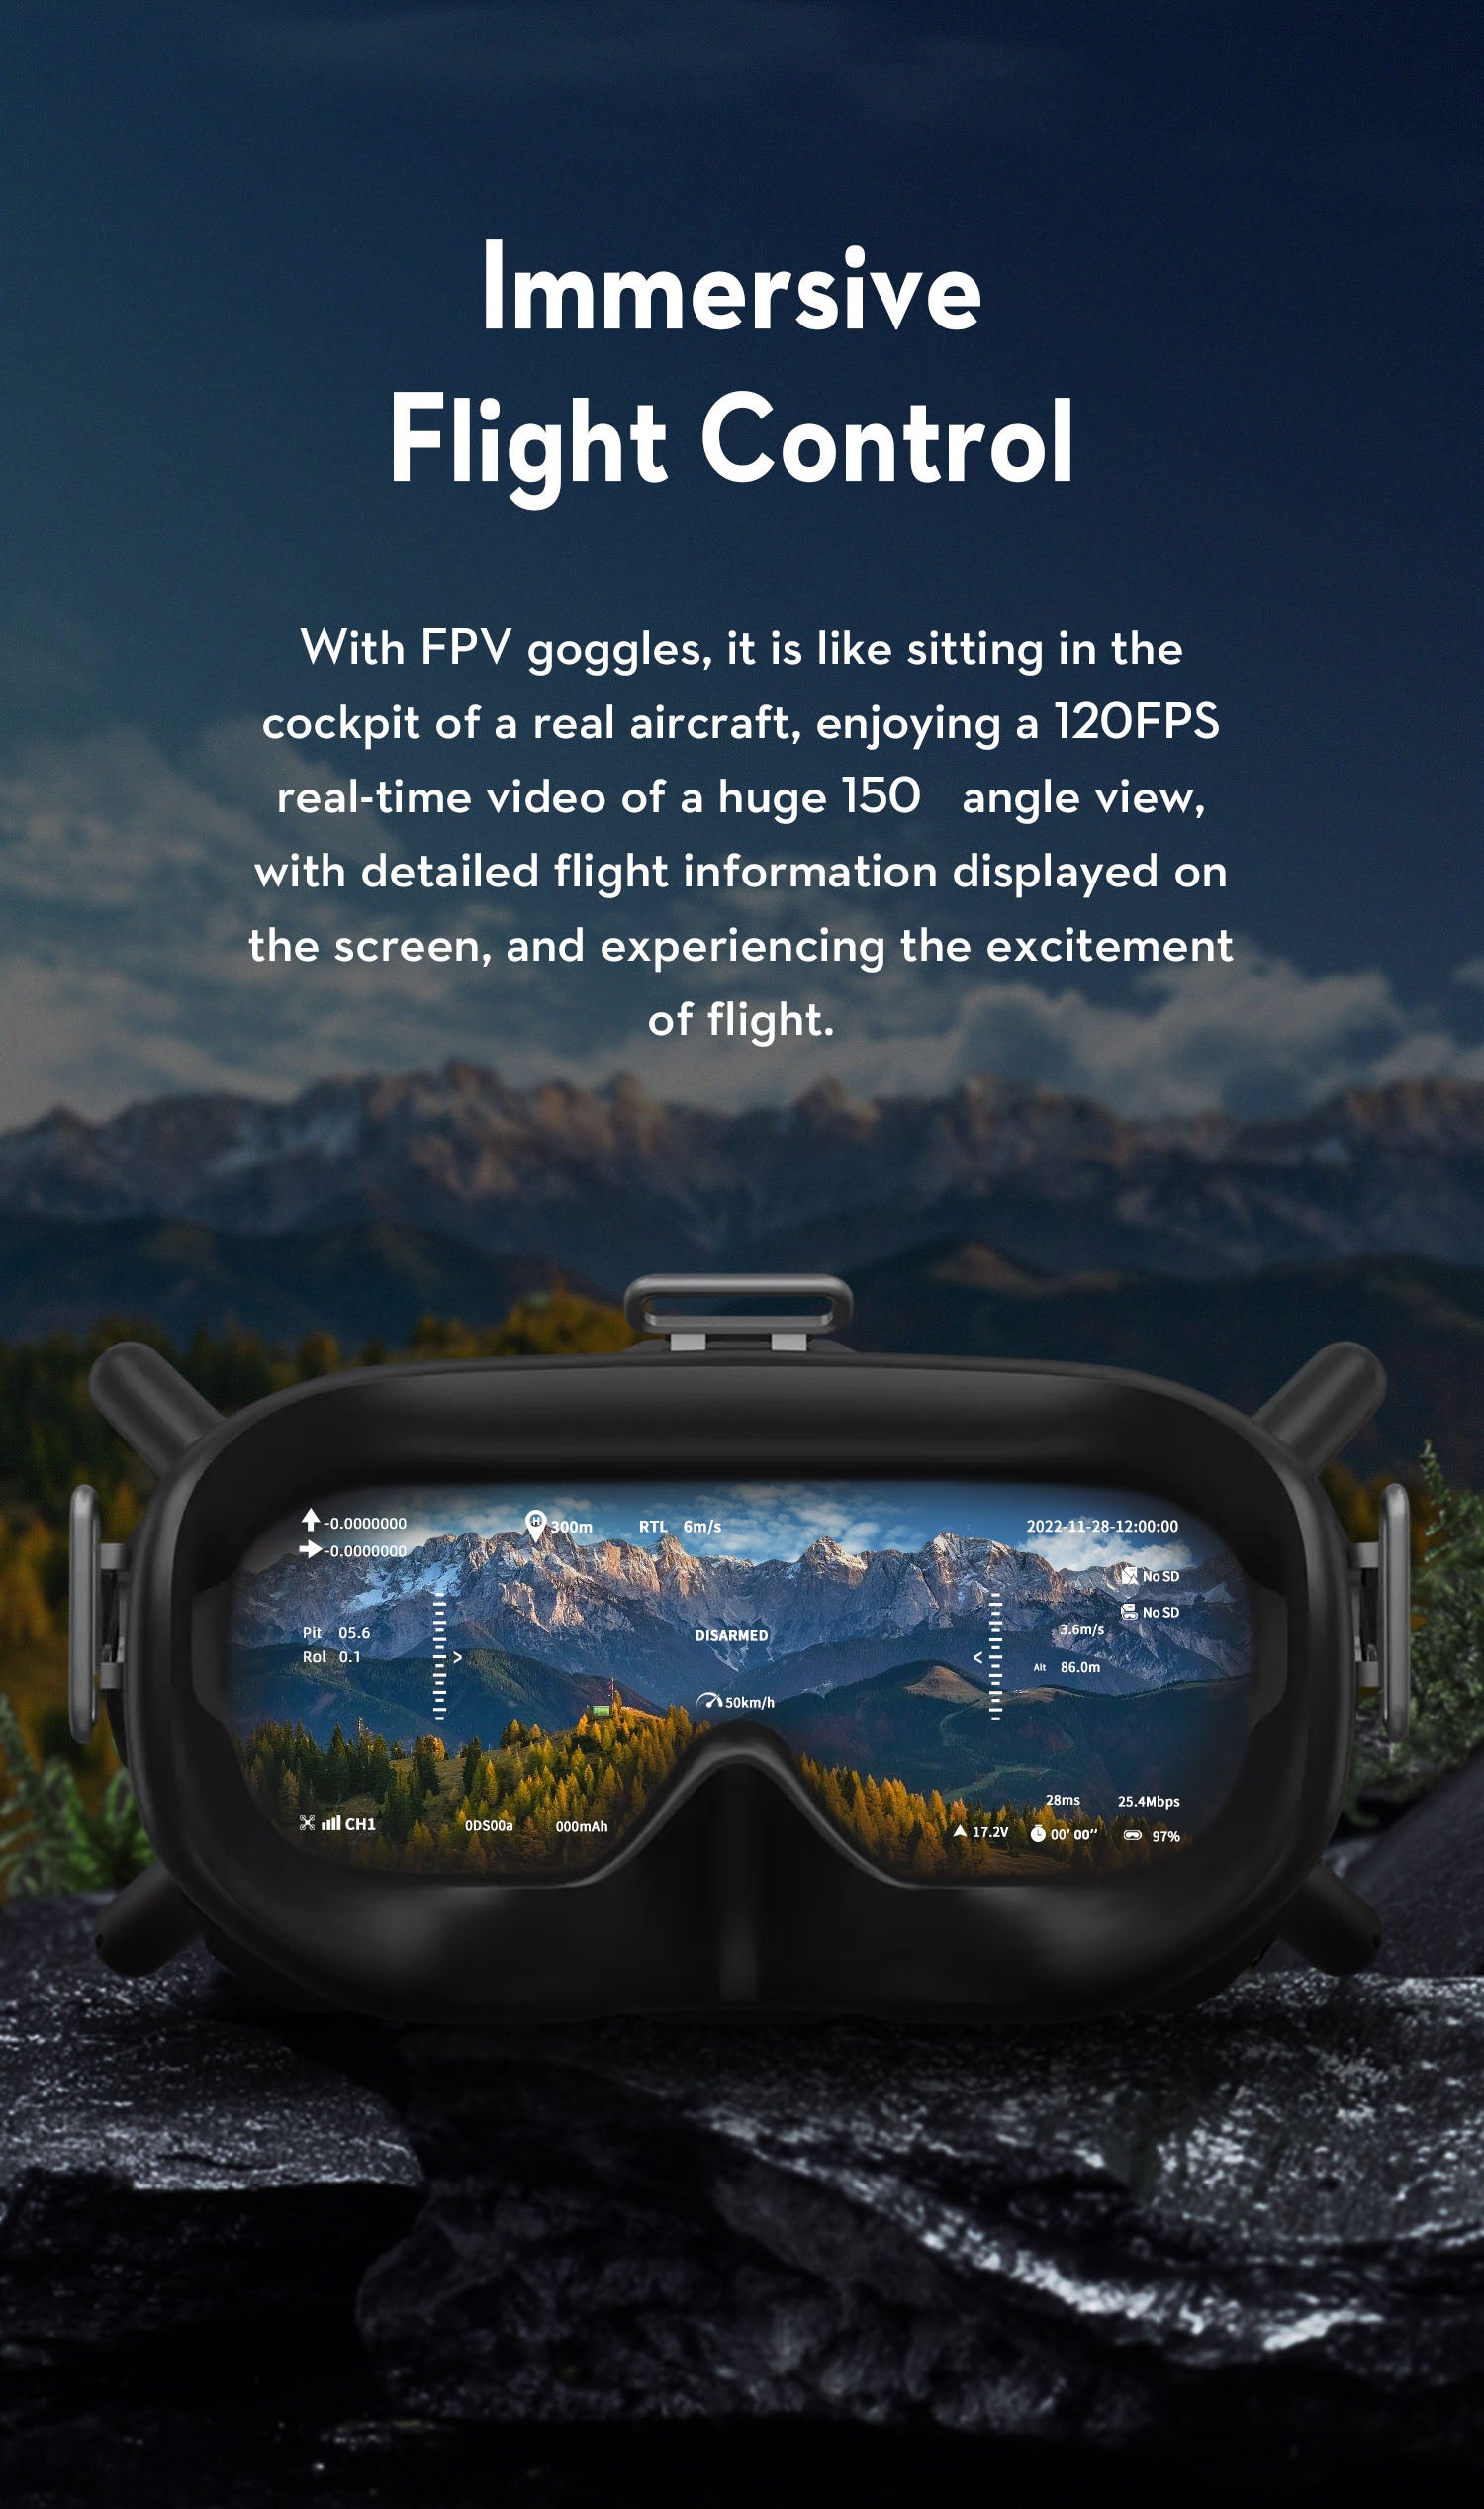 OMPHOBBY ZMO PRO VTOL FPV Aircraft, FPV goggles provide real-time video feed and flight info, simulating actual flying experience.